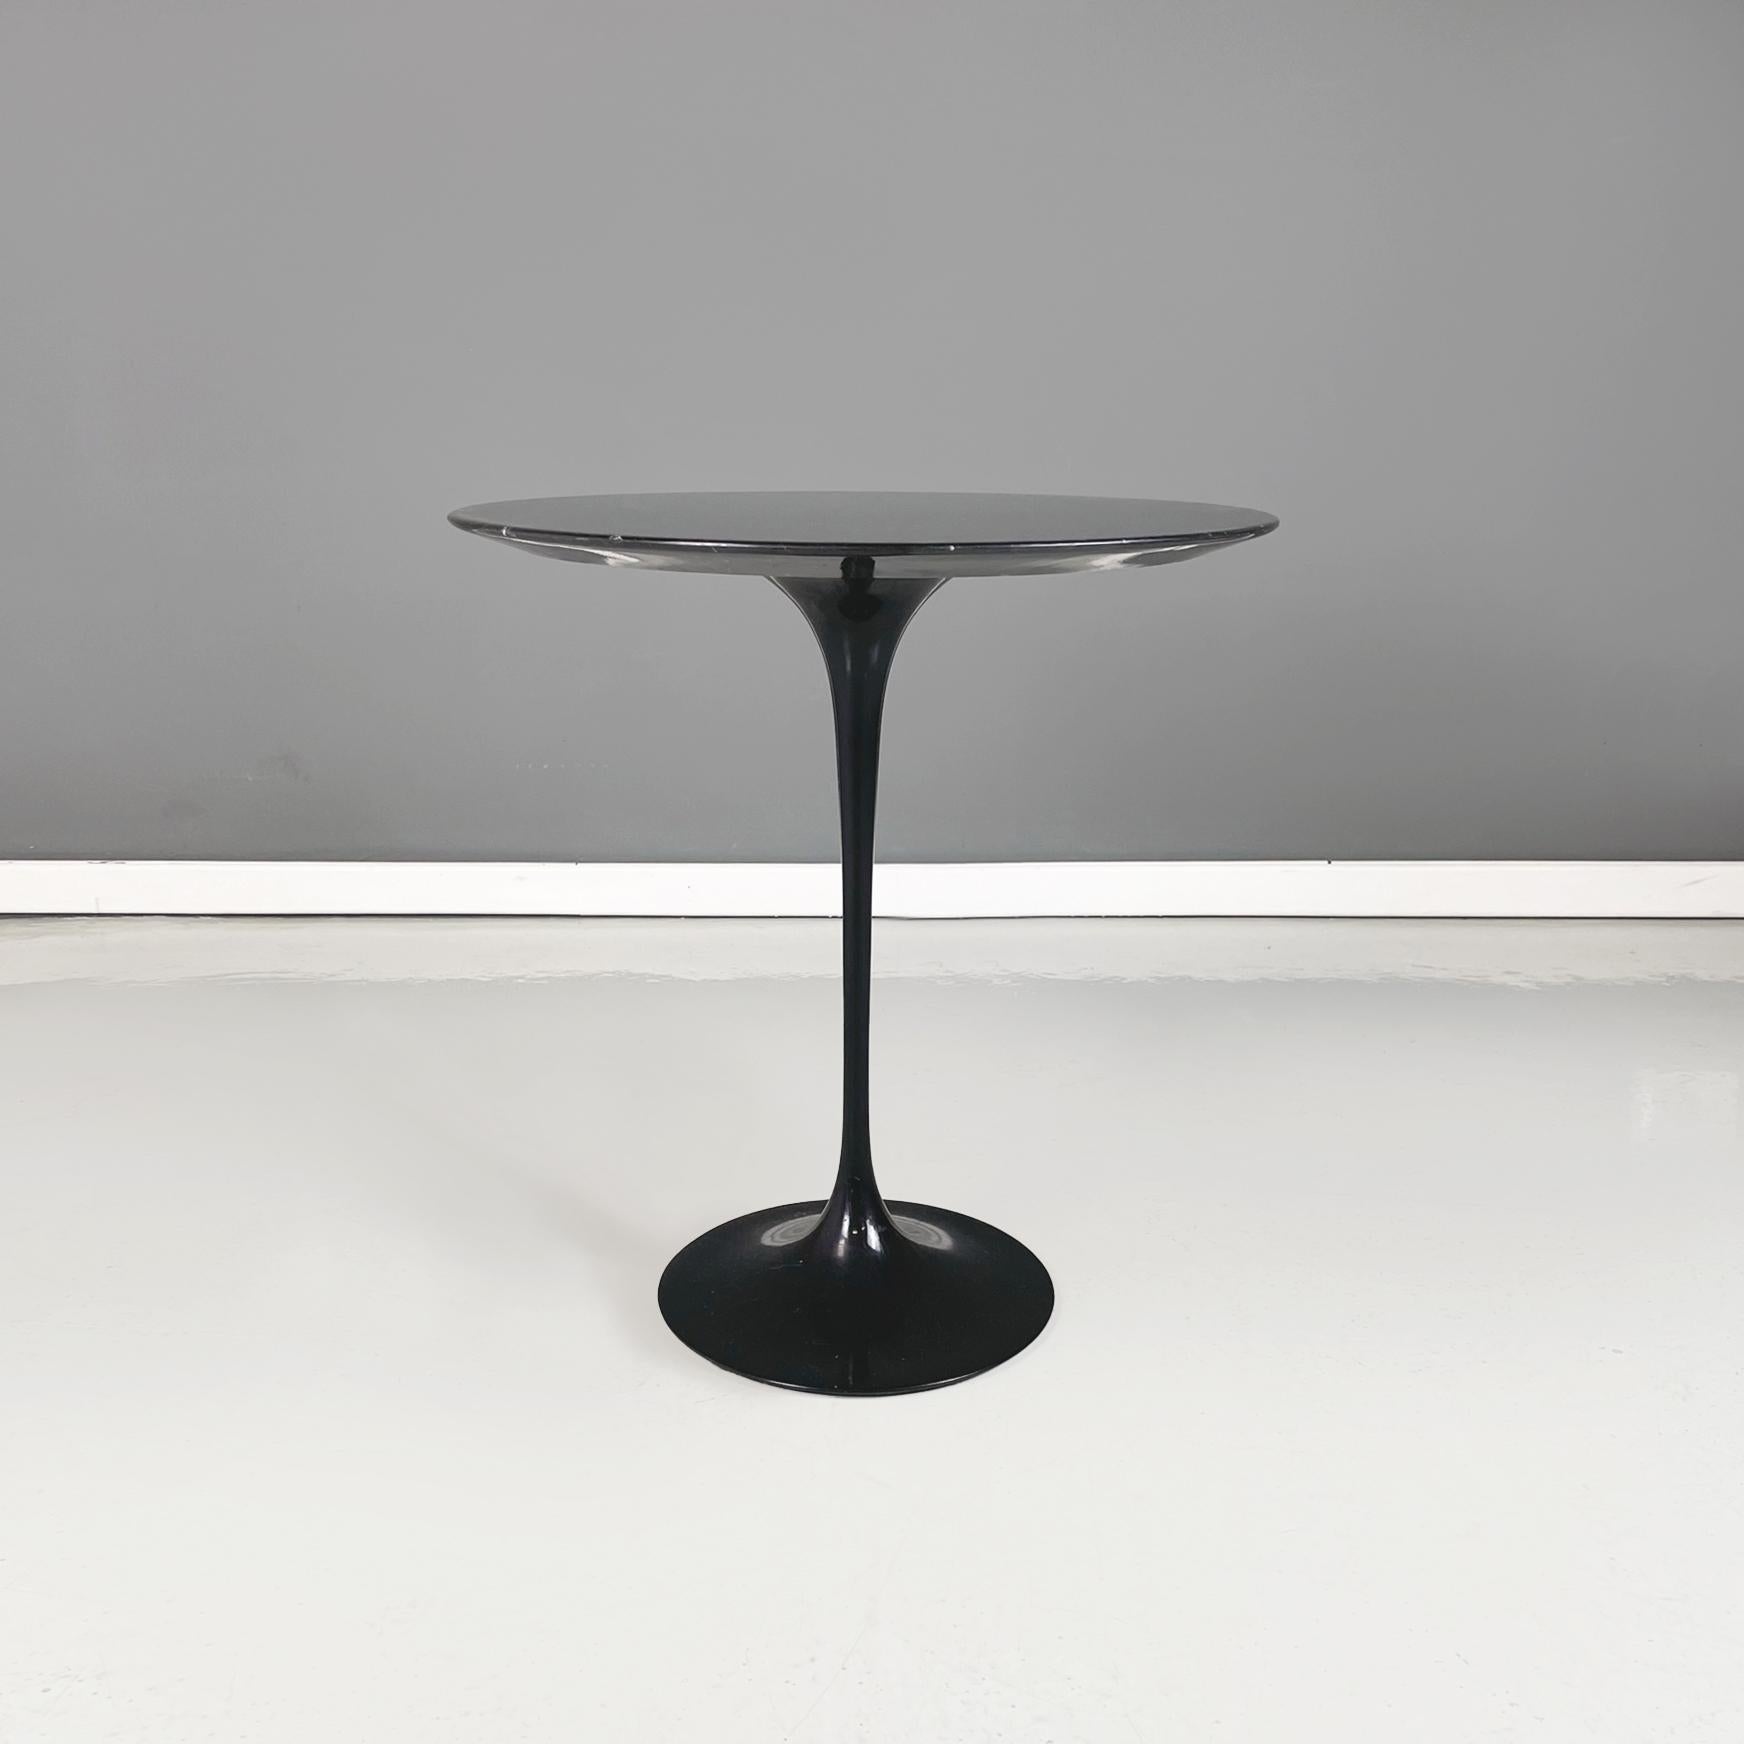 USA modern black marble Coffee table mod. Tulip by Eero Saarinen for Knoll, 1970s
Coffee table mod. Tulip with round top in black marquinia marble with white veins. The paw from the table is in black painted metal.
Produced by Knoll in circa 1970.